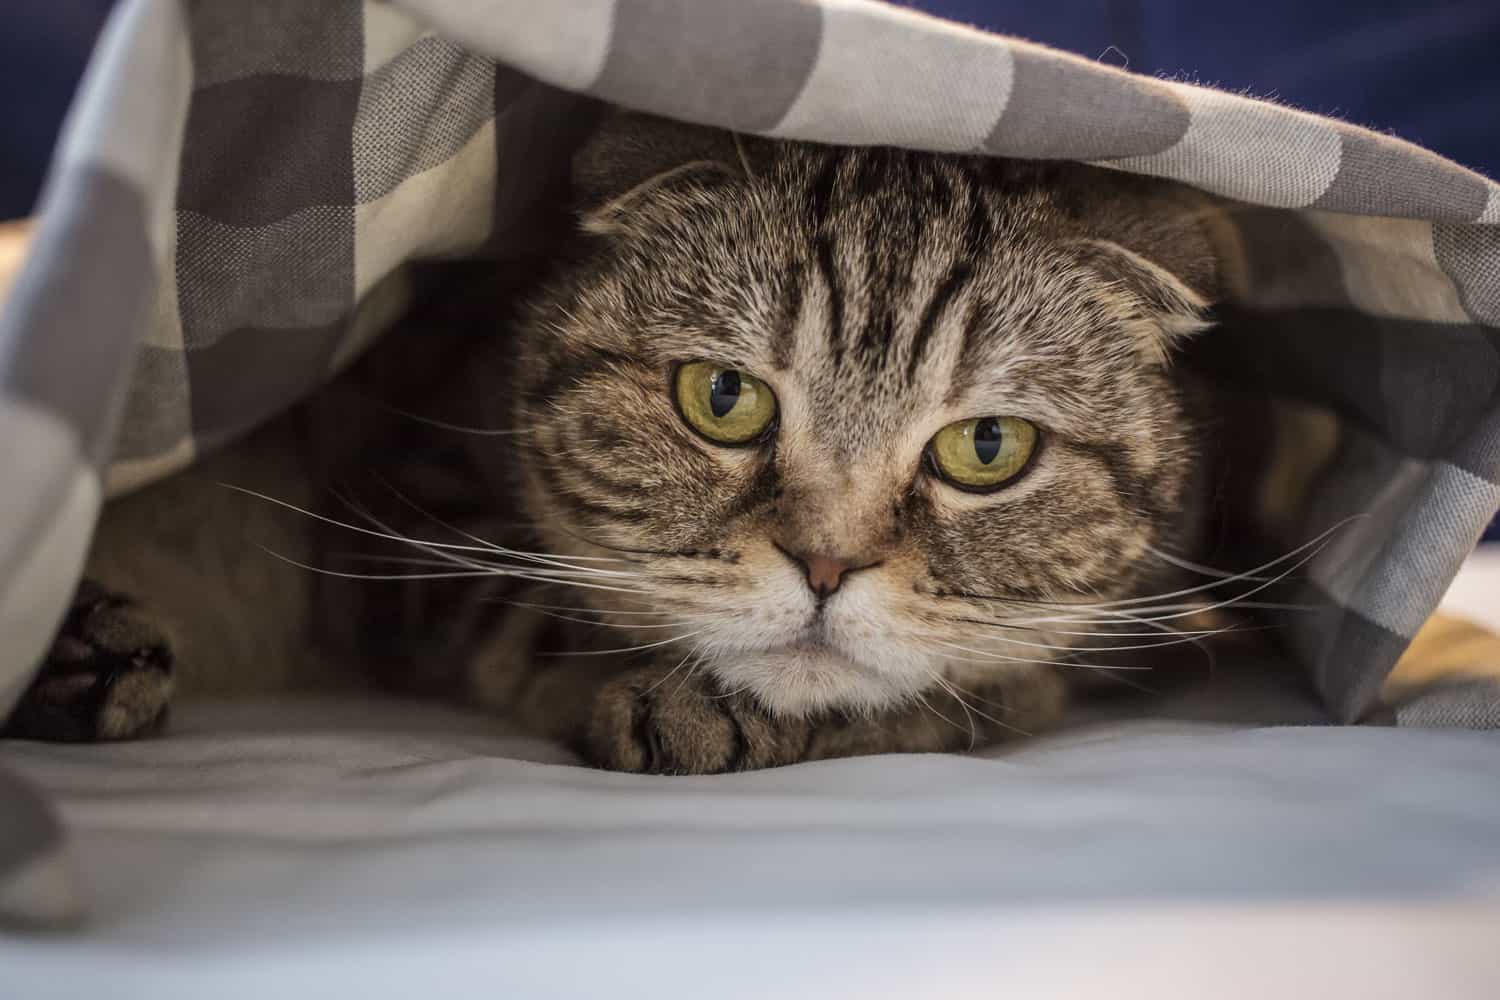 Scottish cat has hidden in fright under the checkered blanket, close-up
